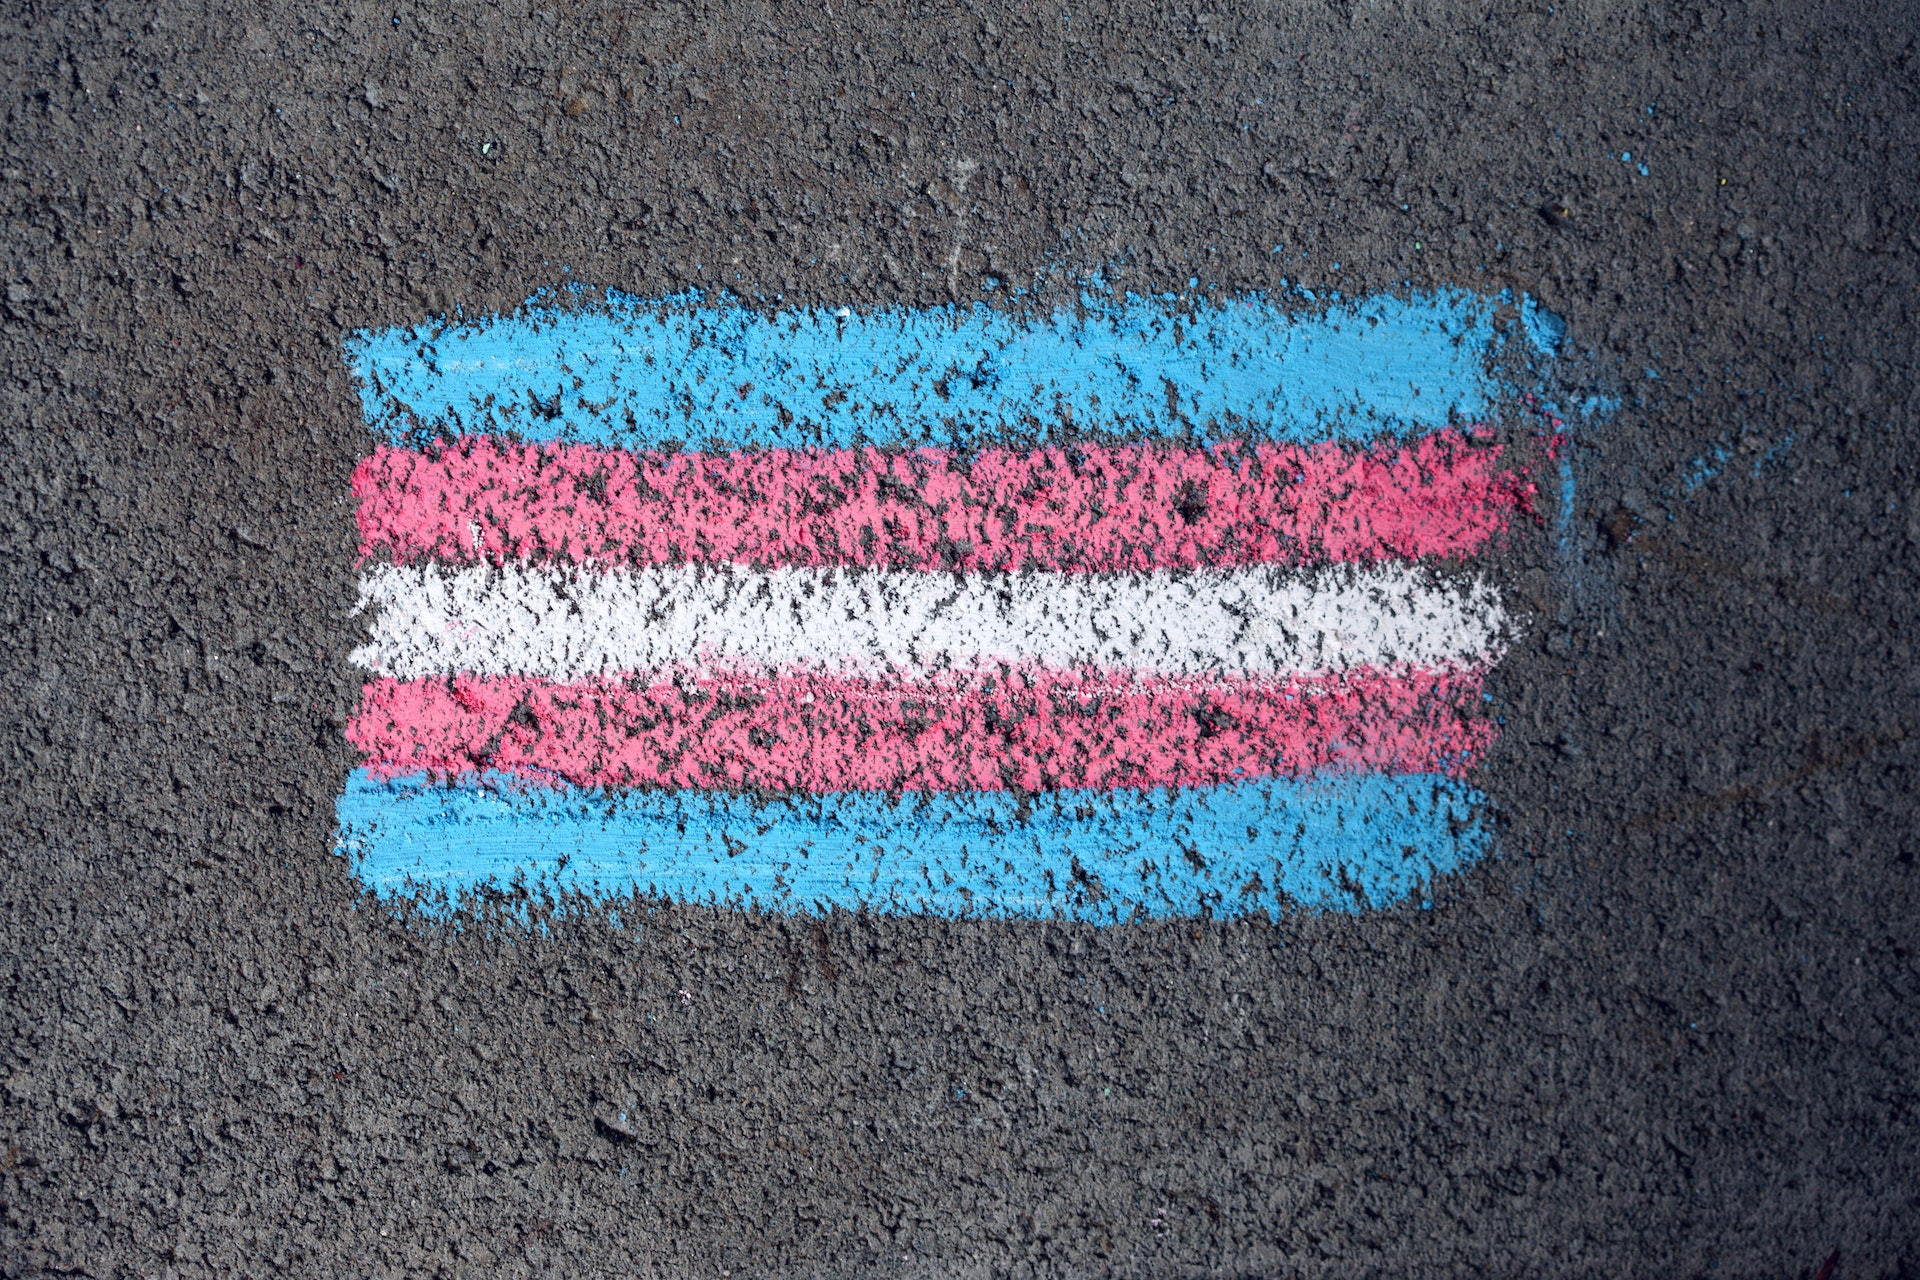 A Groundbreaking Call to Action – The Lancet Advocates for Equitable Care for Trans and Non-Binary People